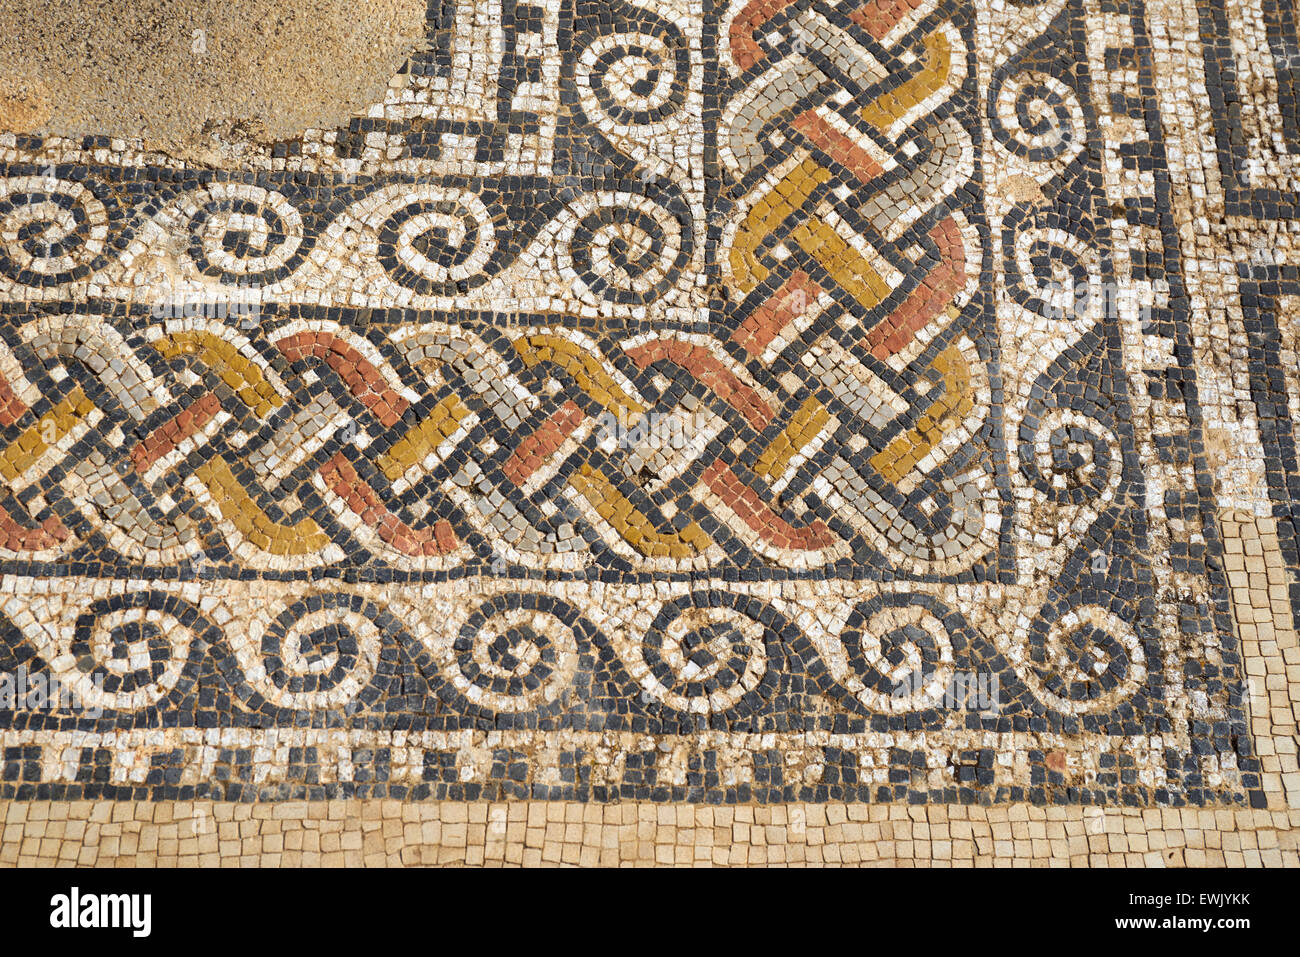 A mosaic in the Roman ruins of Volubilis, Meknes region, UNESCO, Morocco, Africa Stock Photo